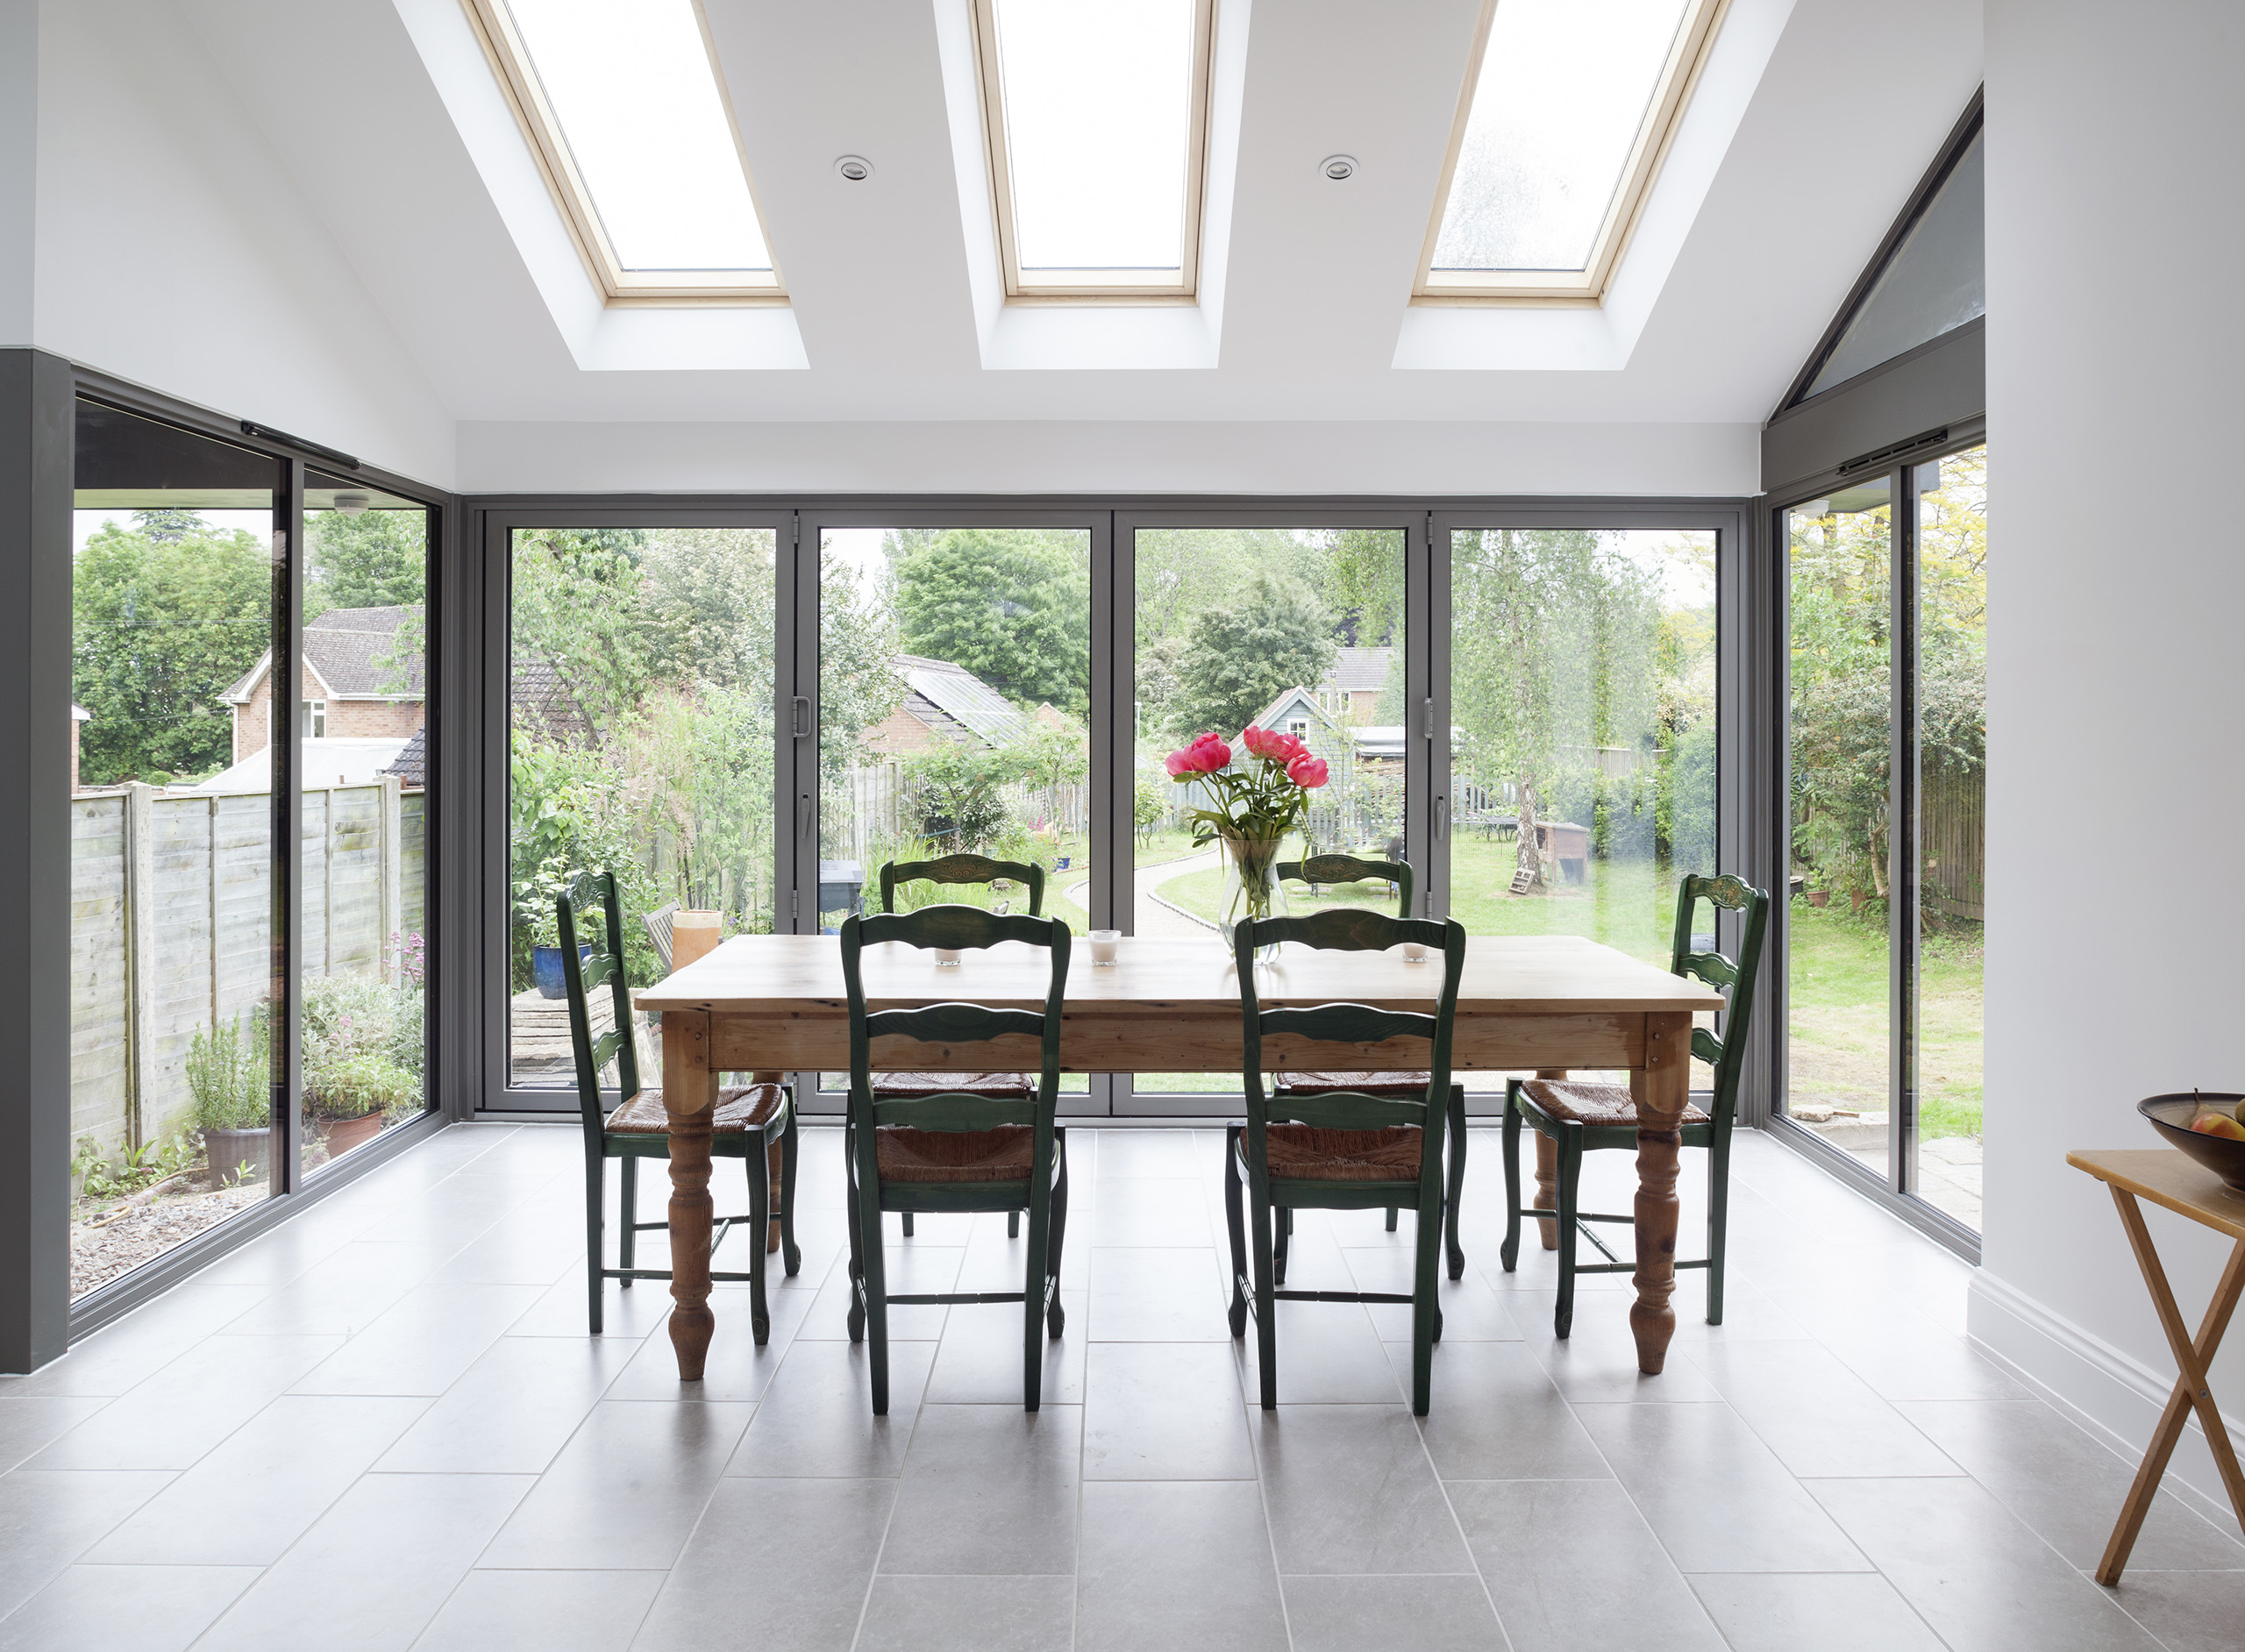 Why should you choose a House Extension for your Home?